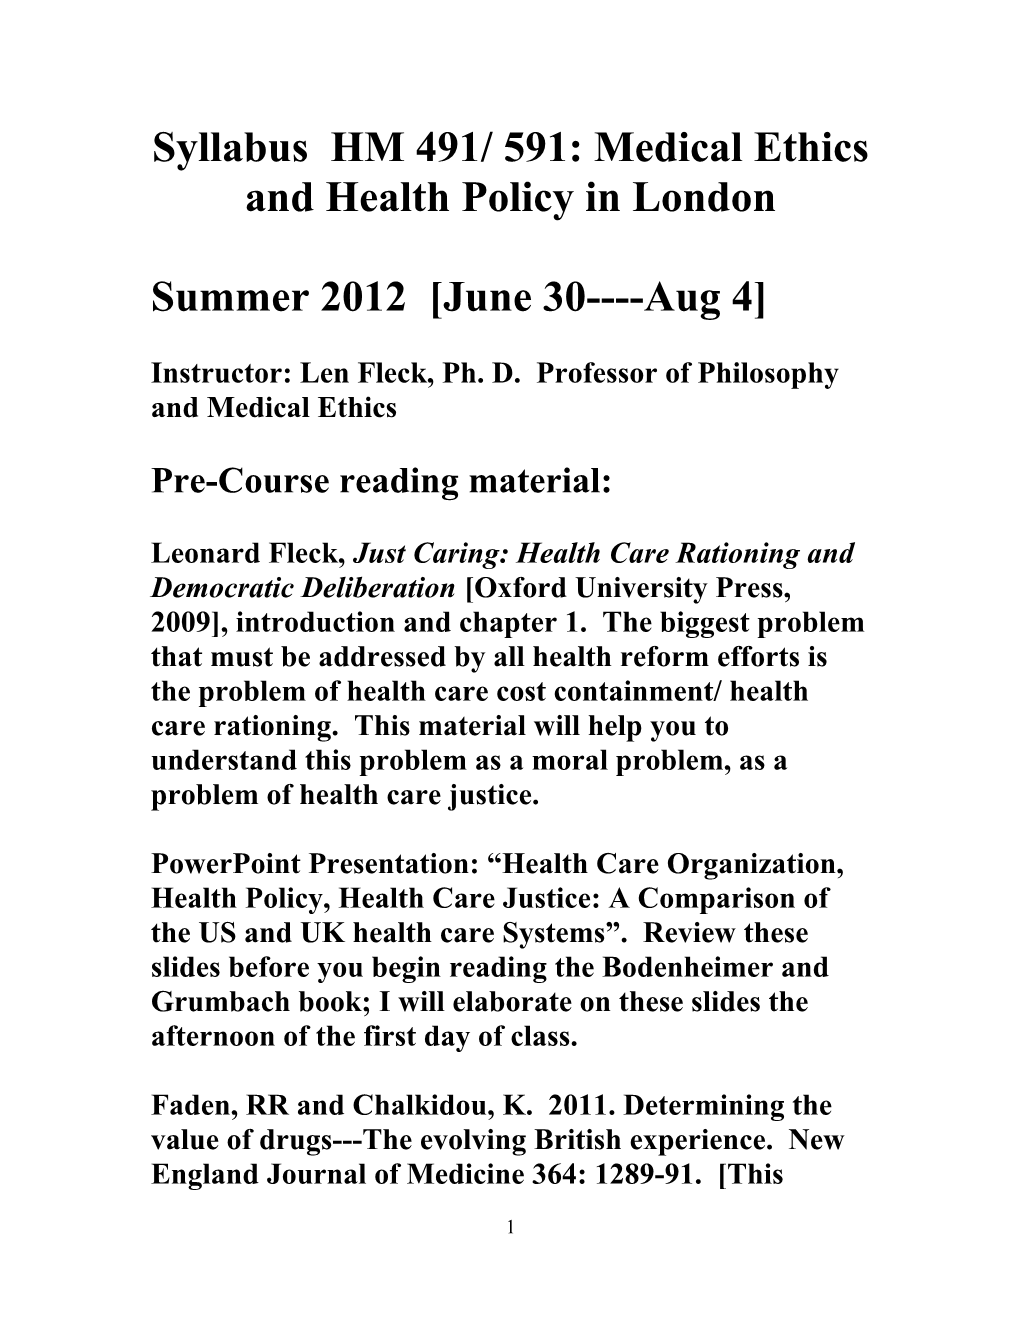 Medical Ethics and History of Health Care in London